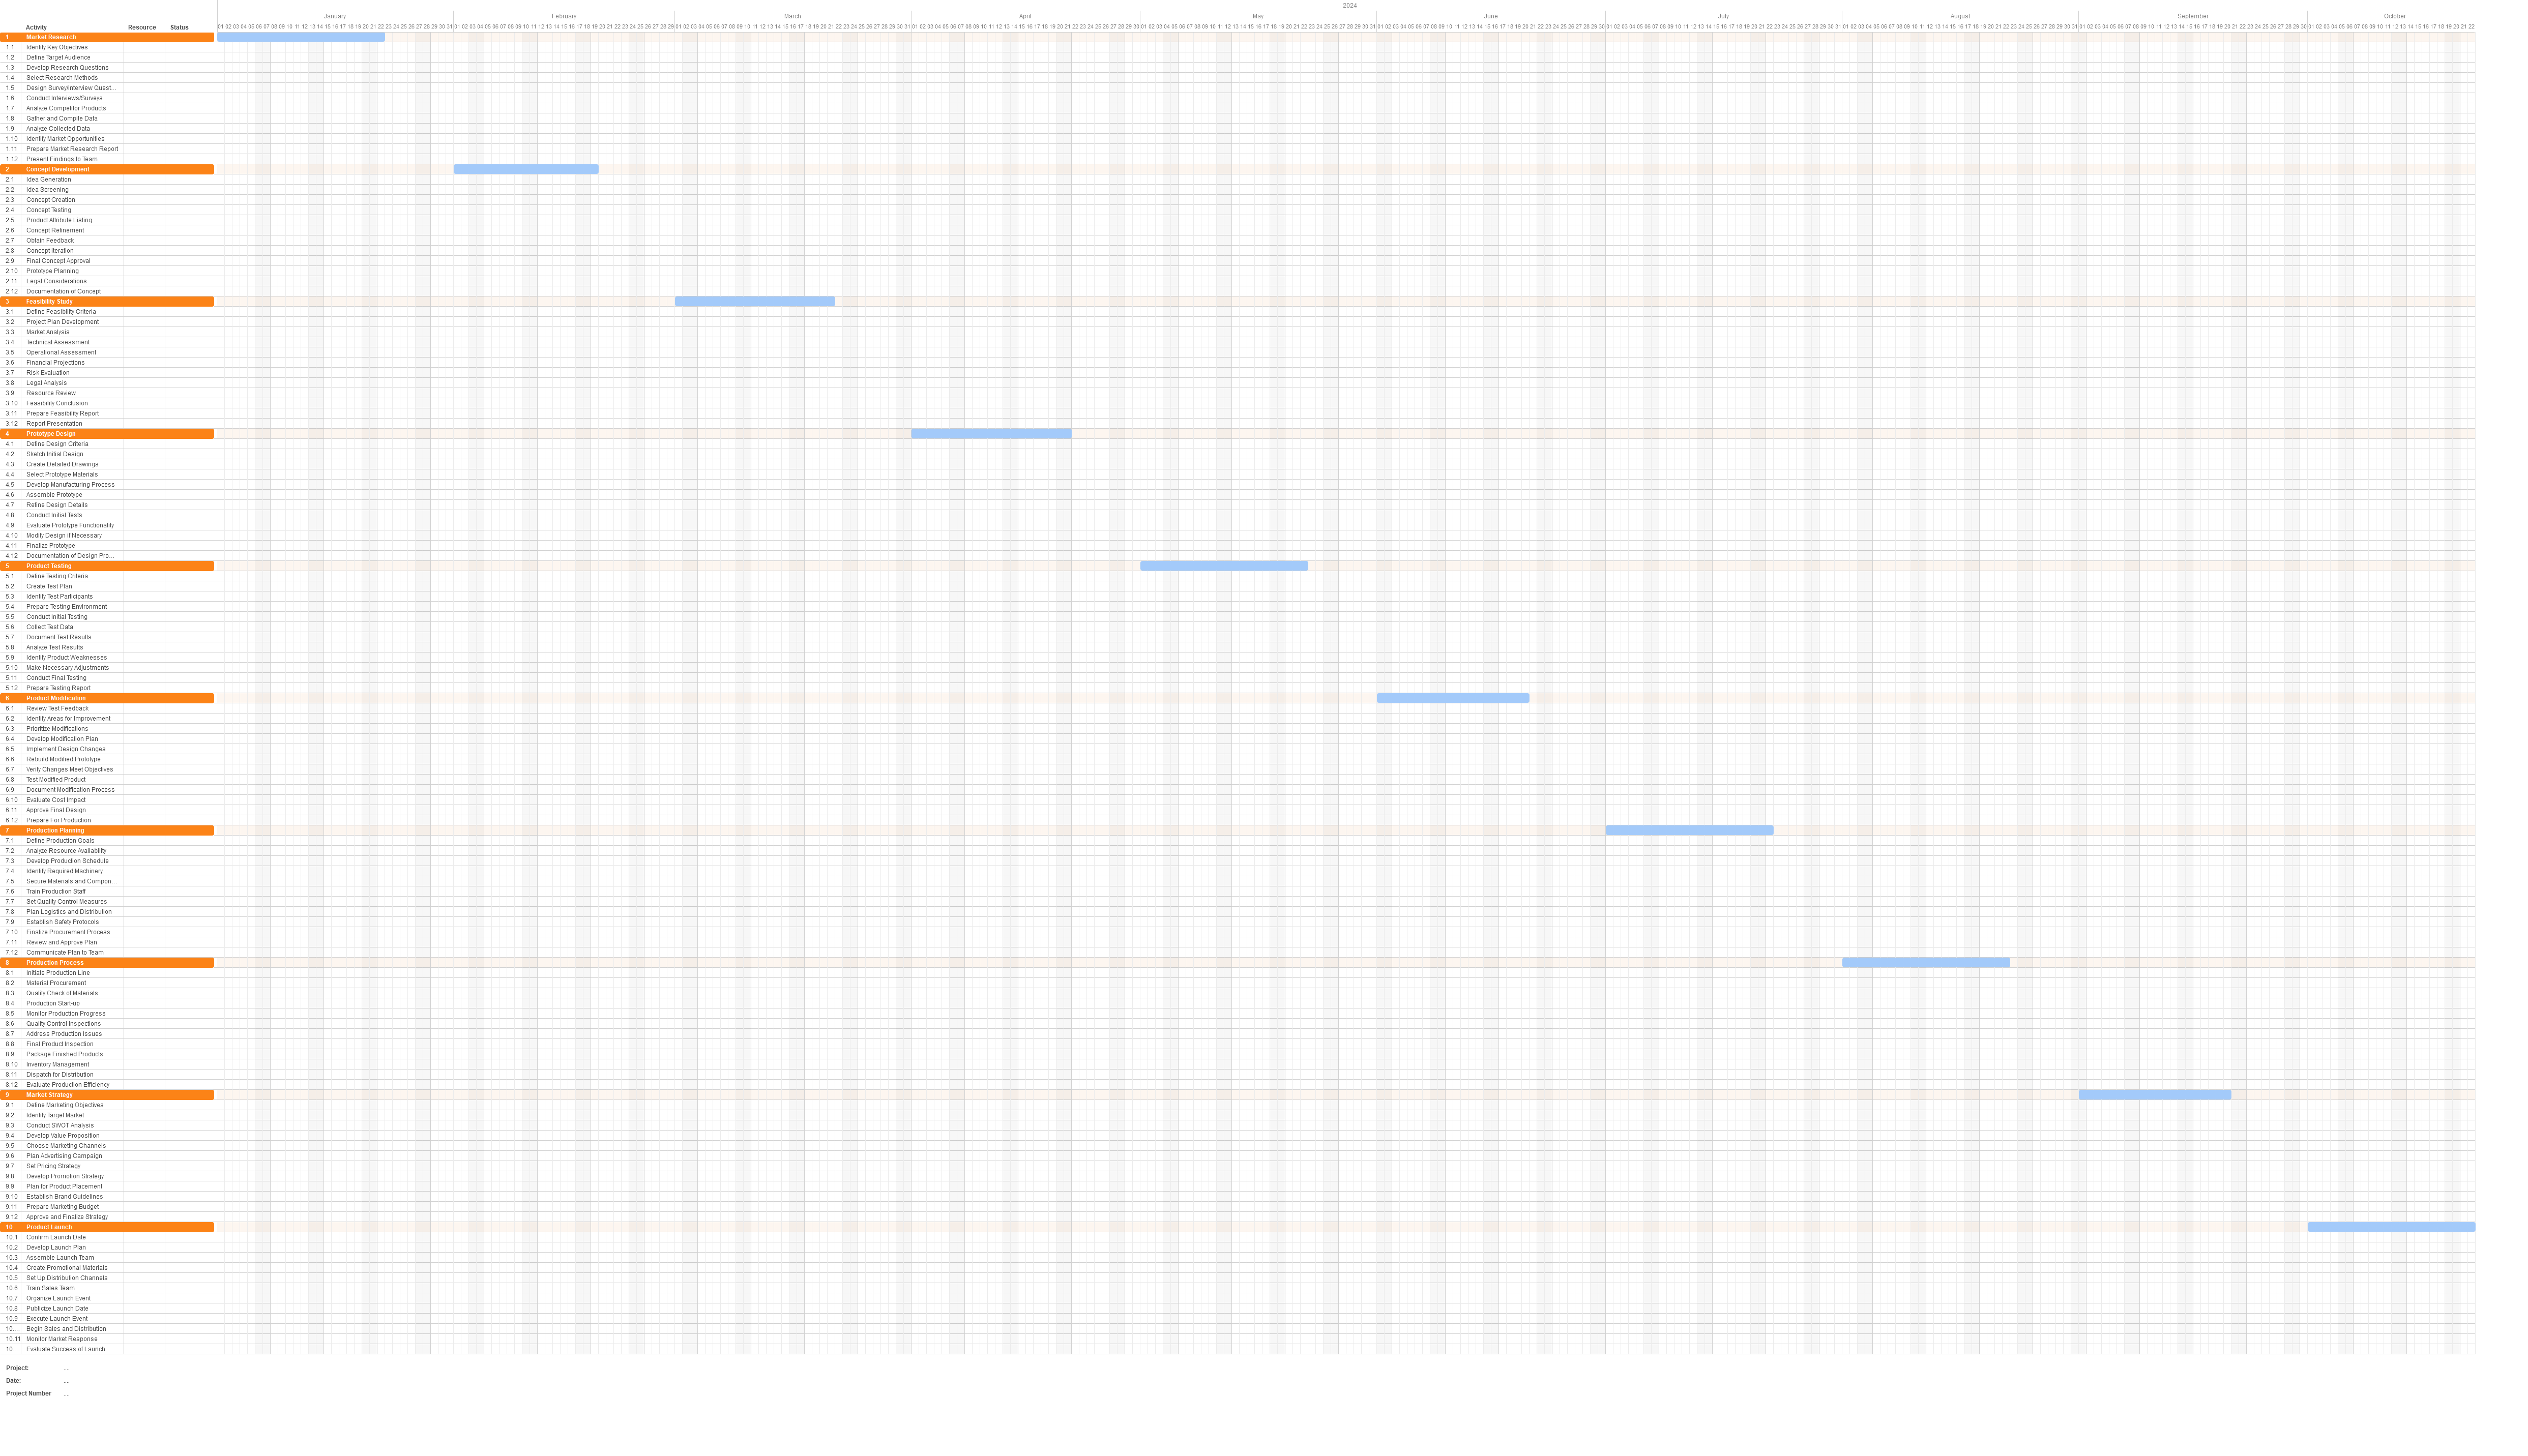 Gantt chart for a New Product Launch project